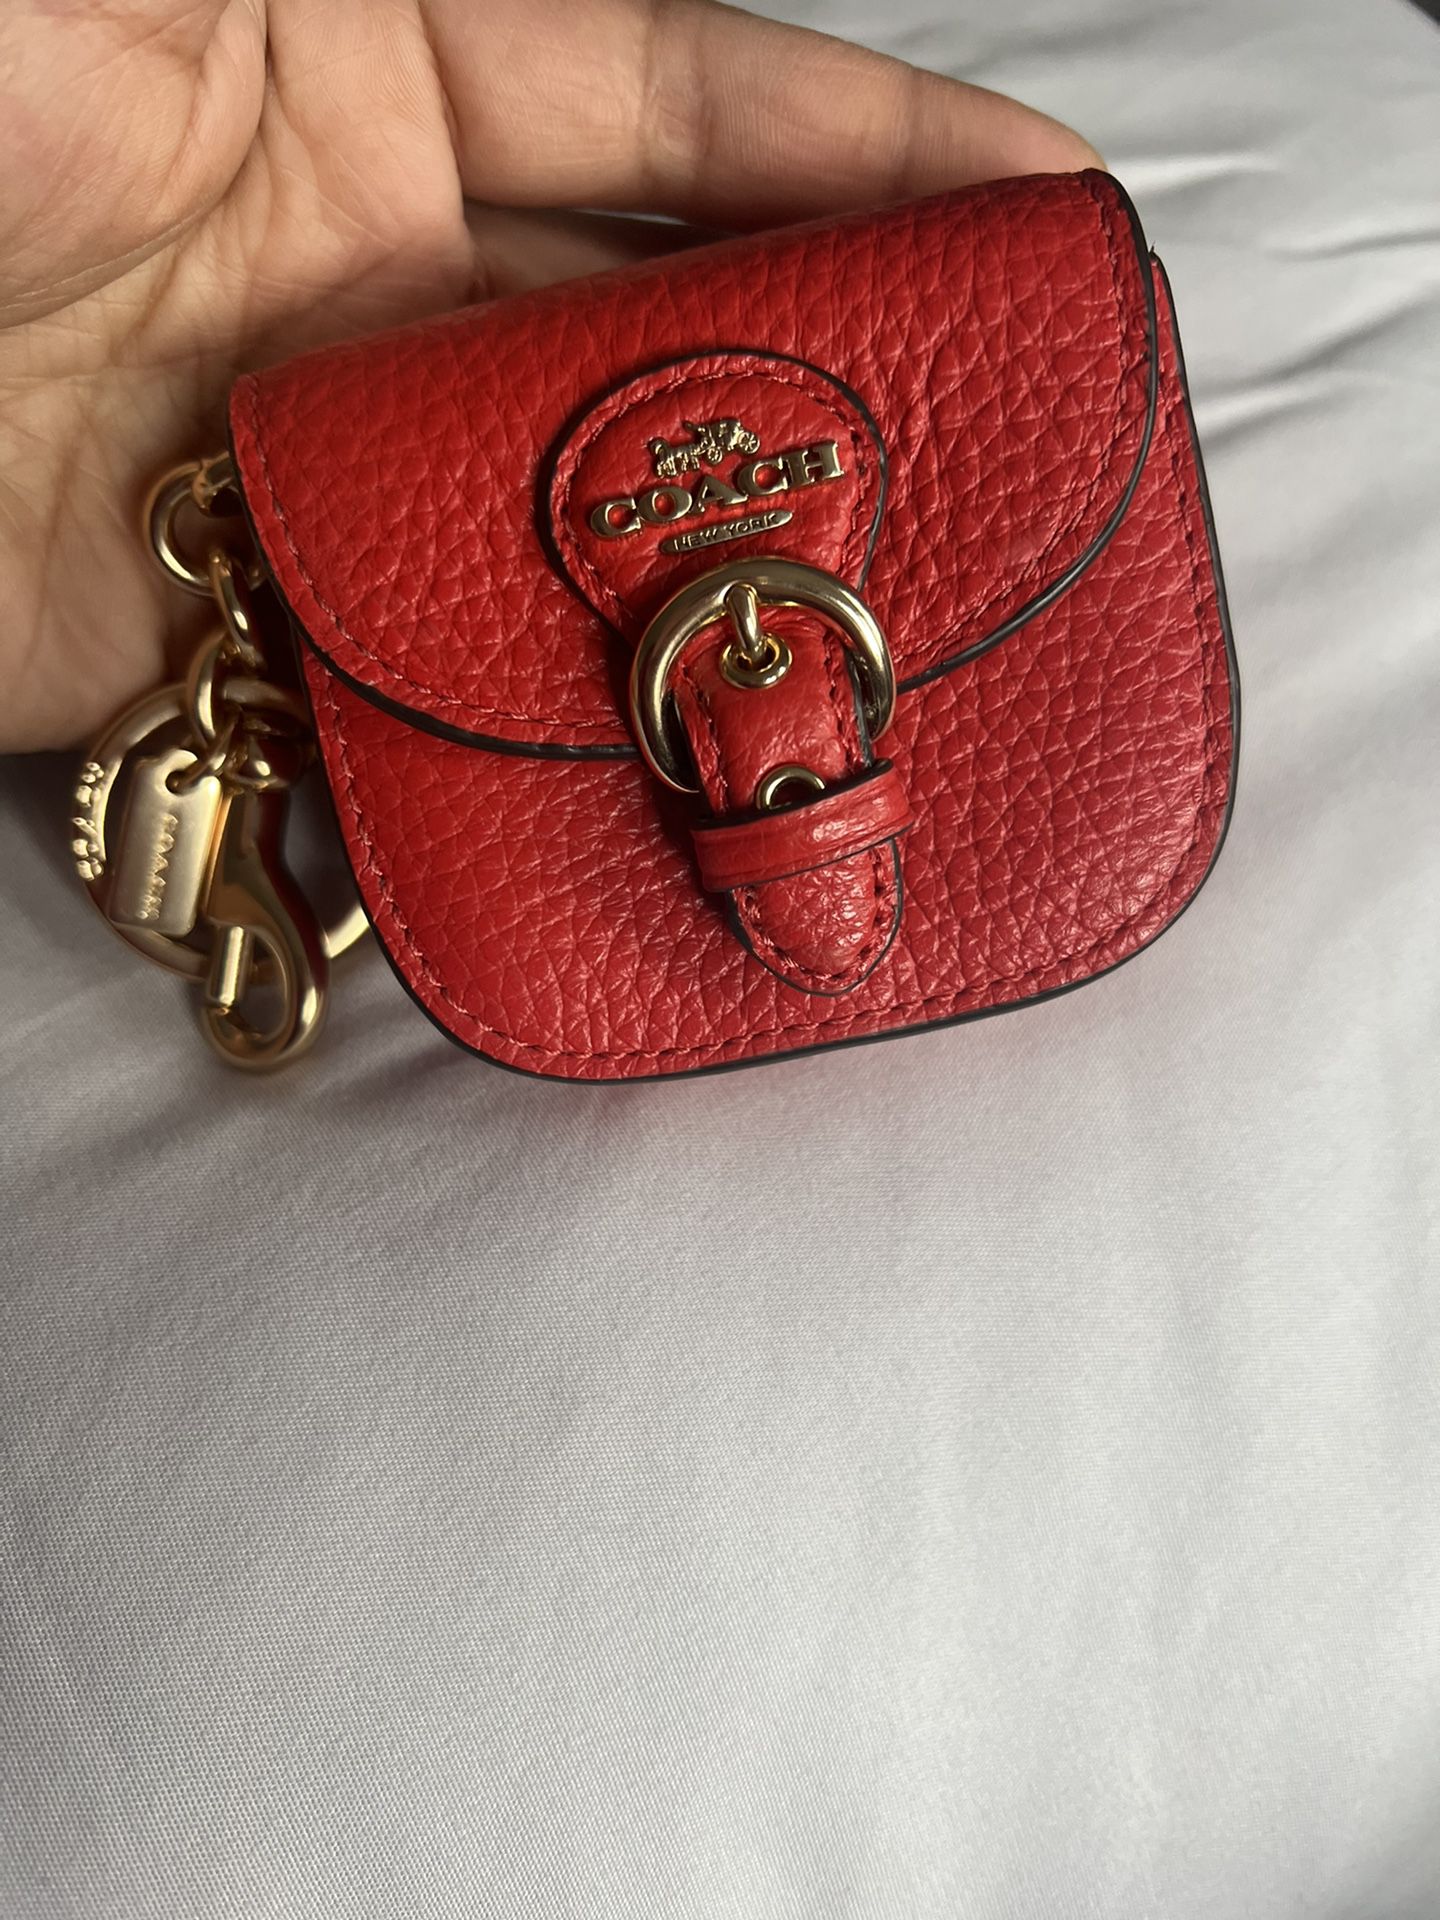 Coach Mini Saddle Bag Charm . for Sale in Ossining, NY - OfferUp